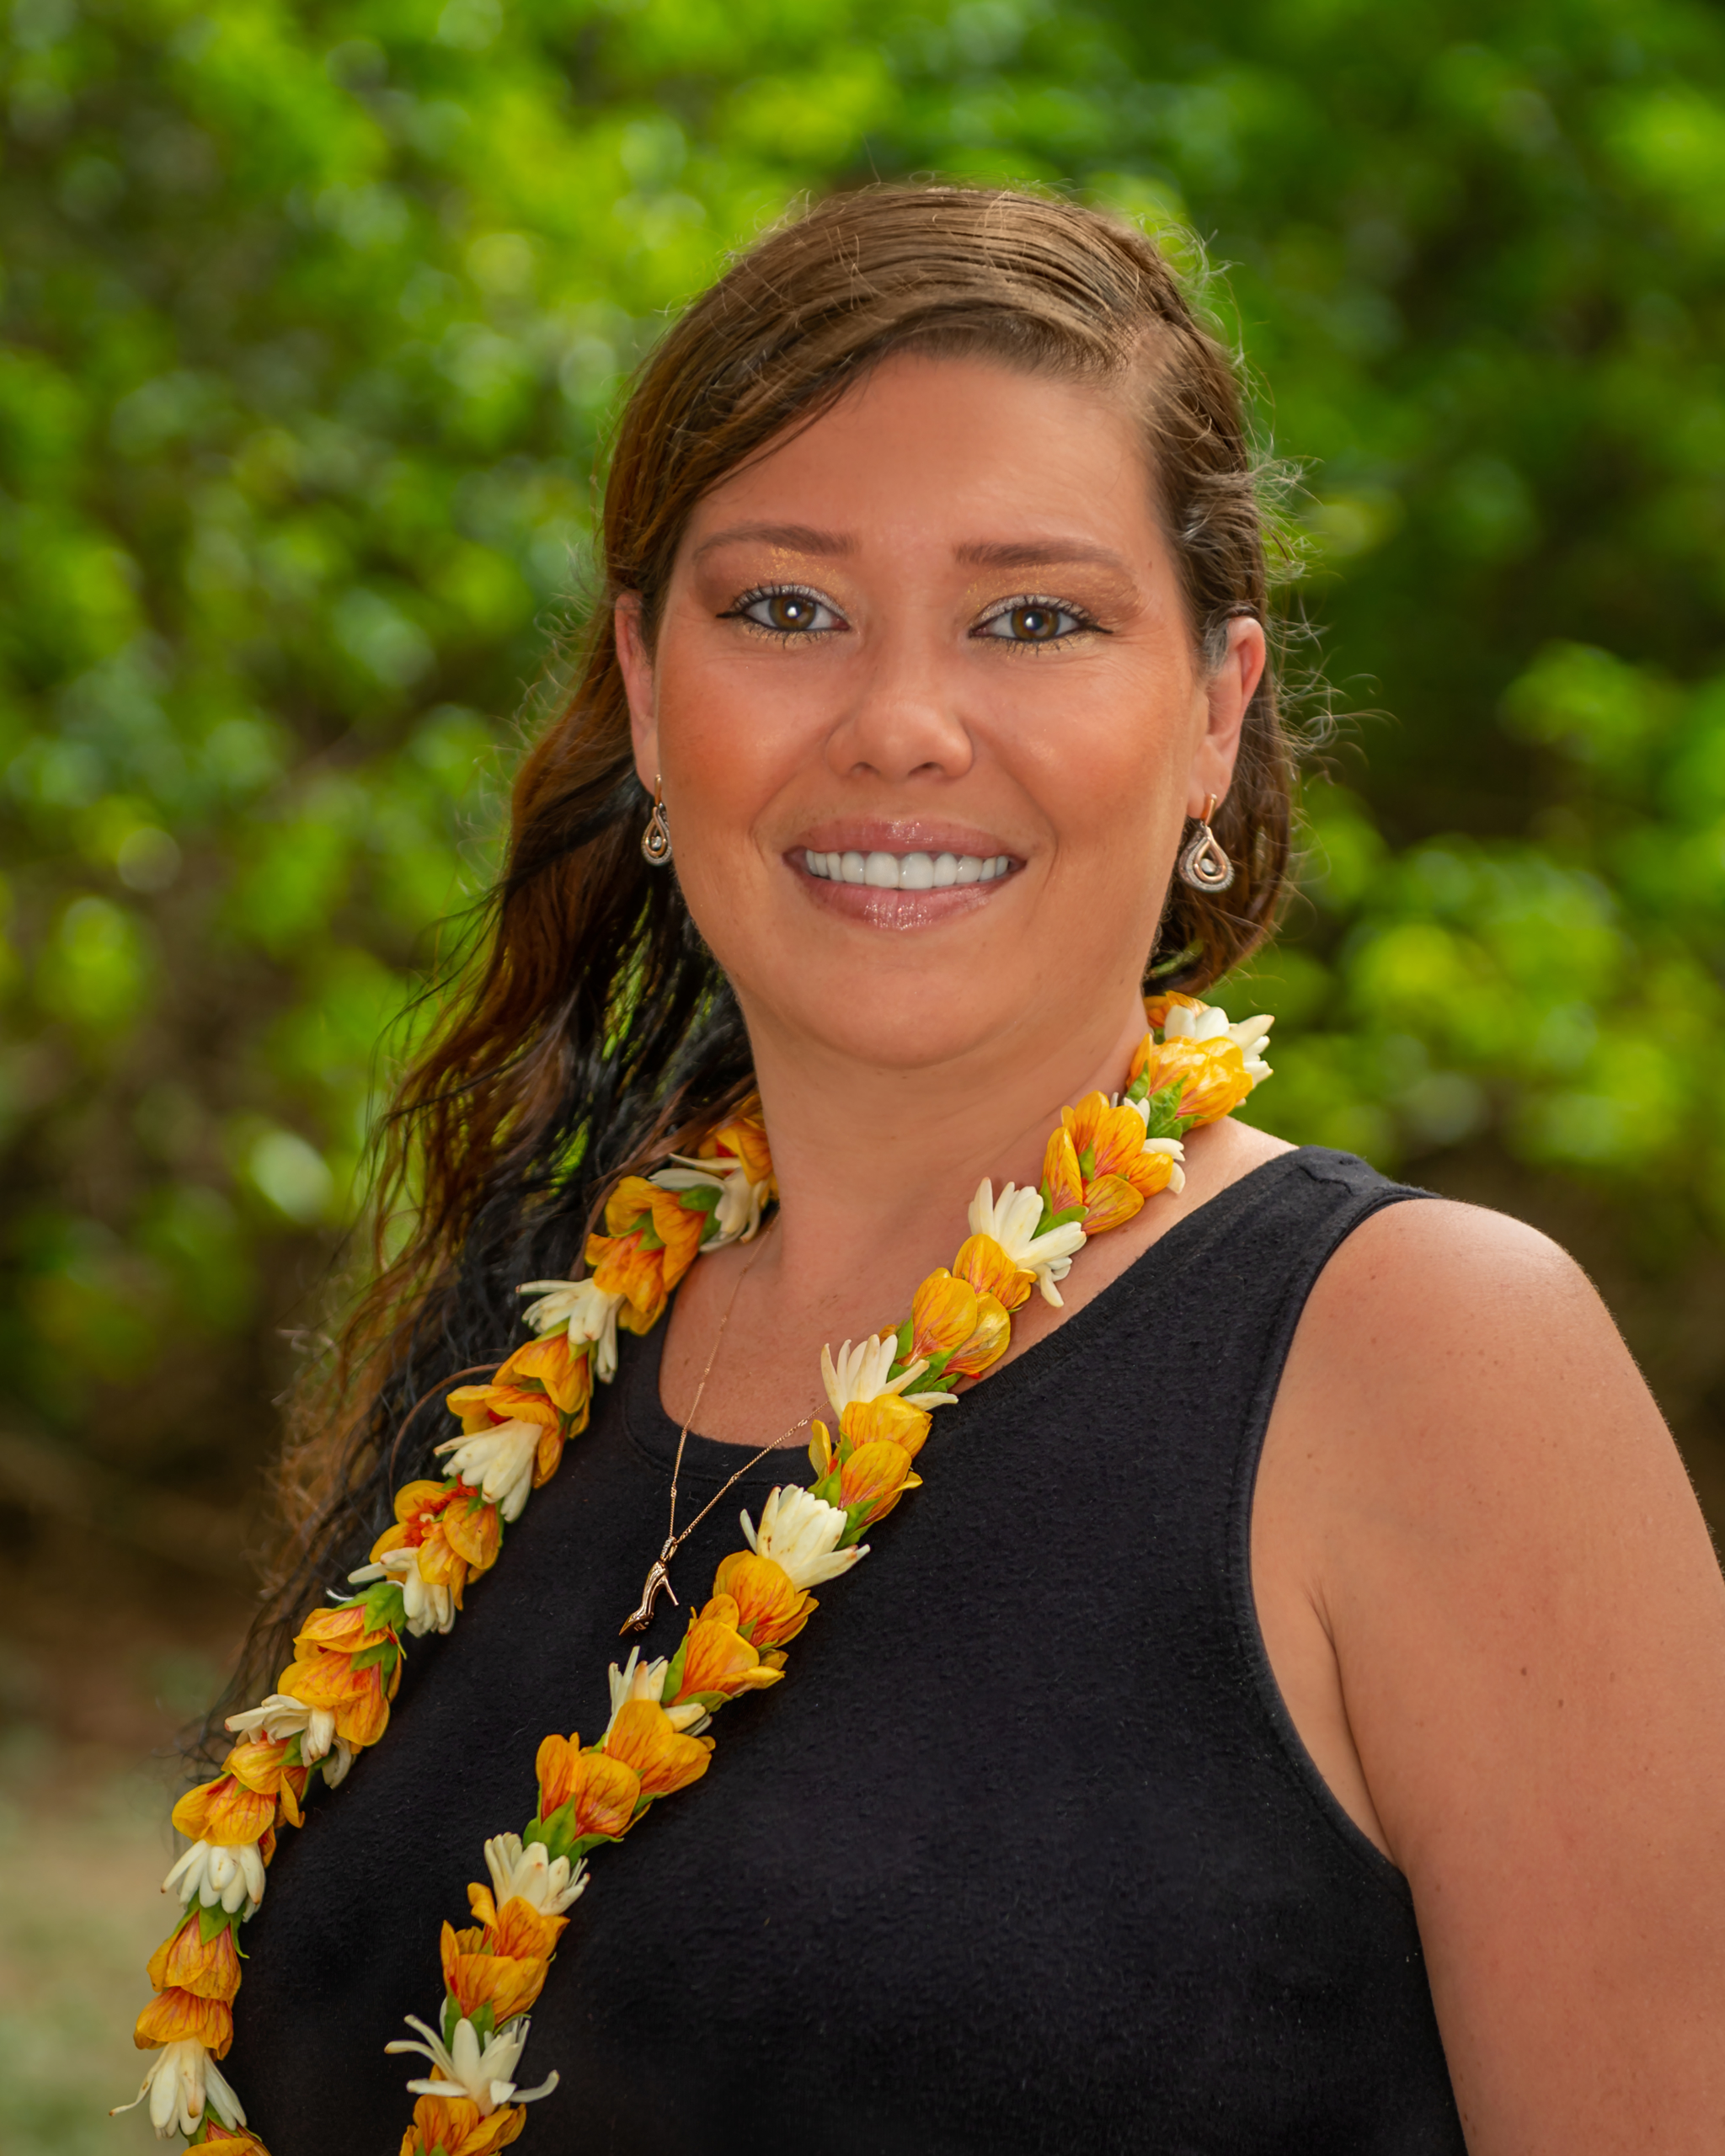 Stephanie Gerrettie, Office Assistant & Reservations, Vacation Realty Hawaii